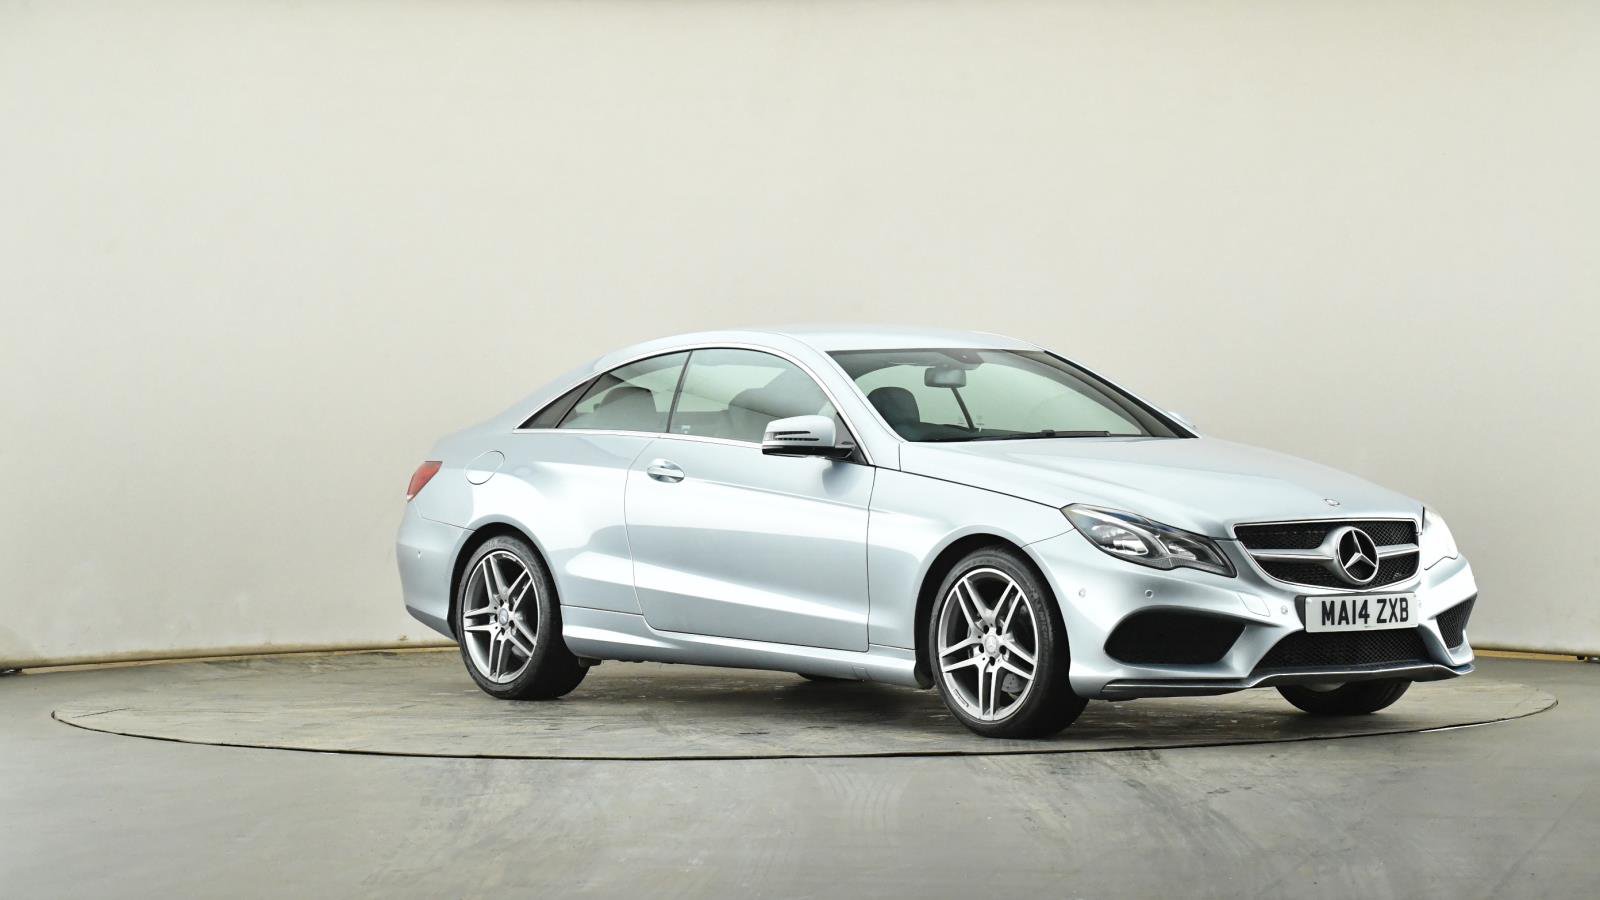 Used Mercedes Benz E Class 50 Bluetec Amg Sport 2dr 7g Tronic Silver Ma14zxb Swindon